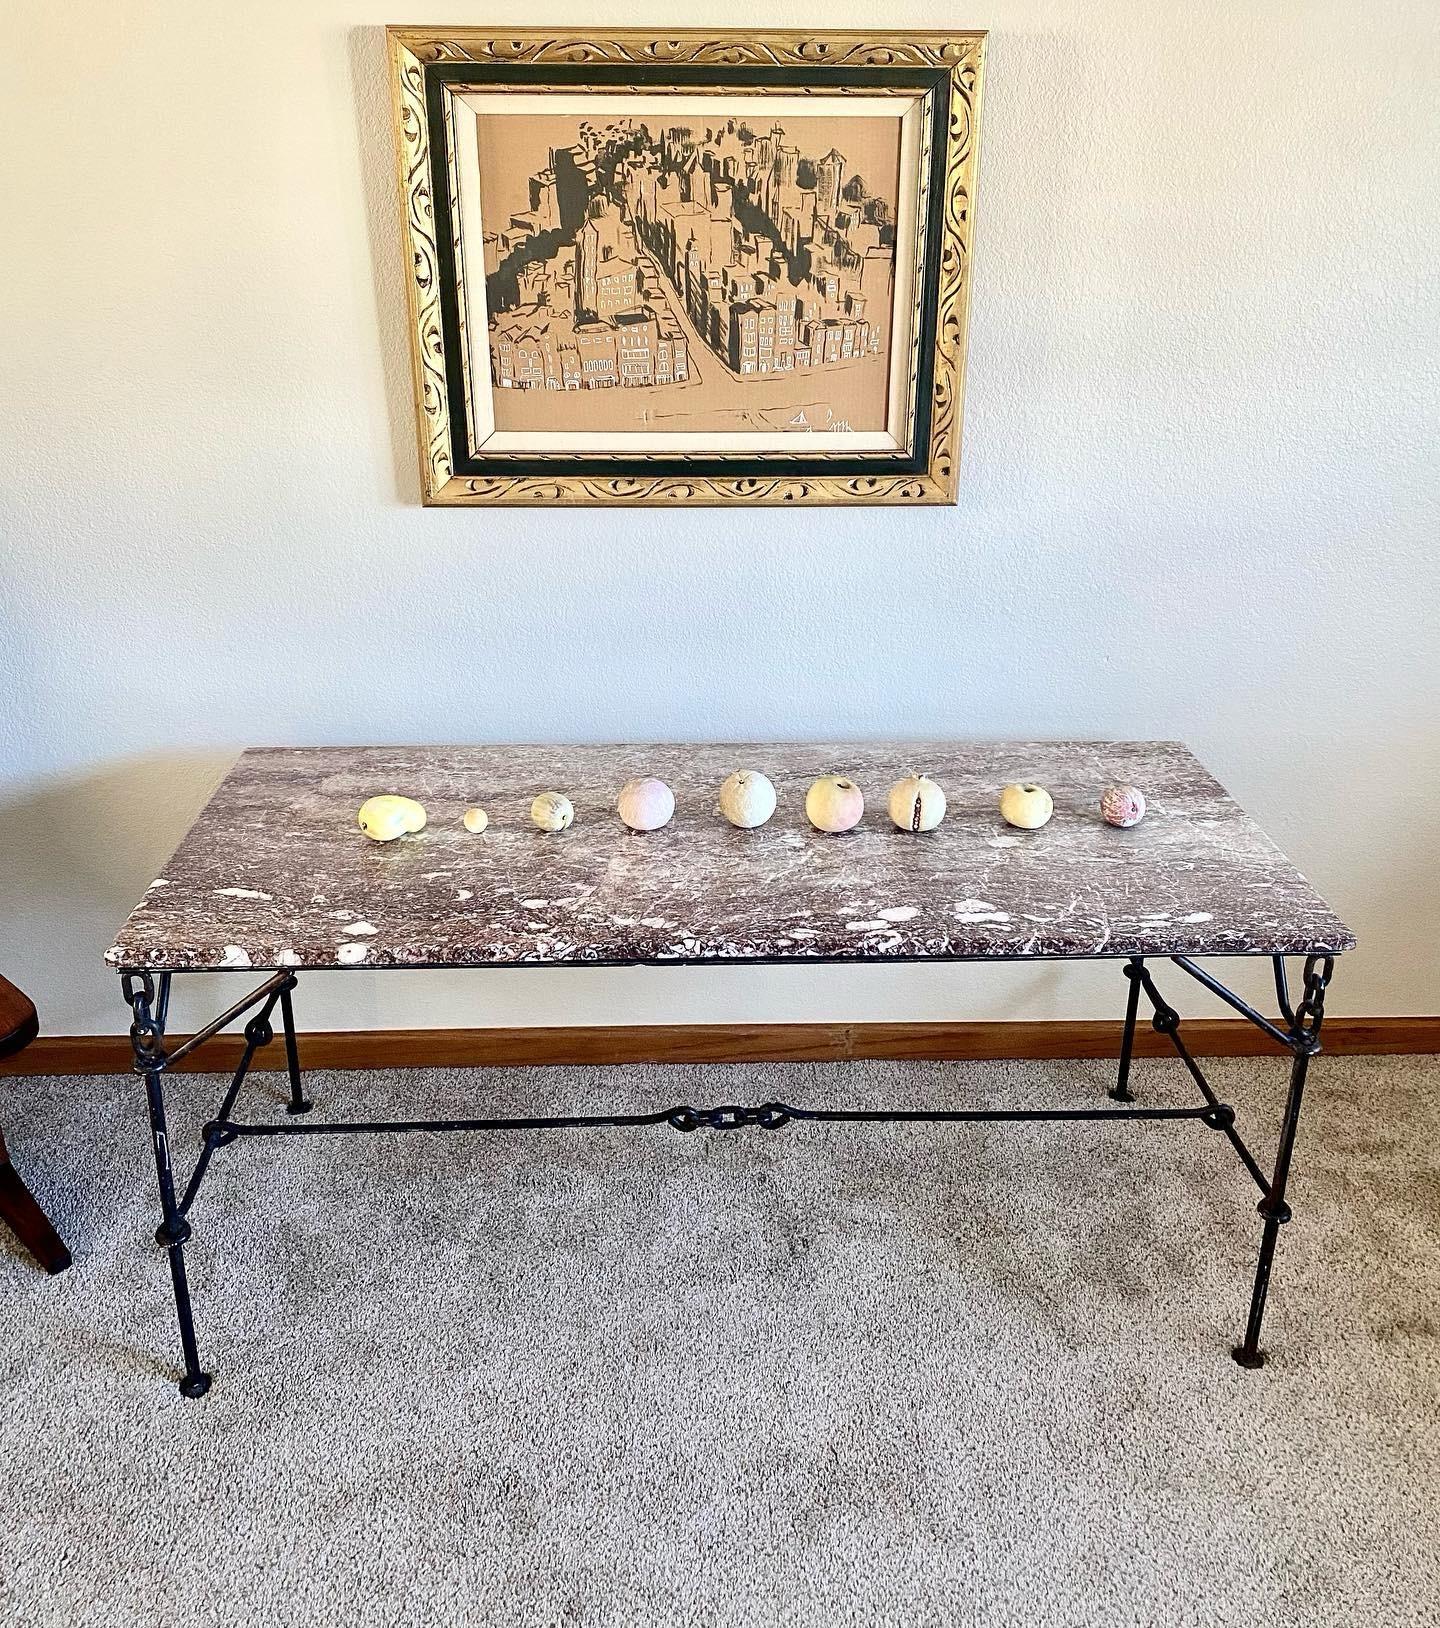 Iron chain base console table with marble top; intermittent use as a desk would be possible with appropriately sized chair. Circa 1960s, in a style popularized by the designs of Franz West. A few niks to base and age appropriate, light scuffing and